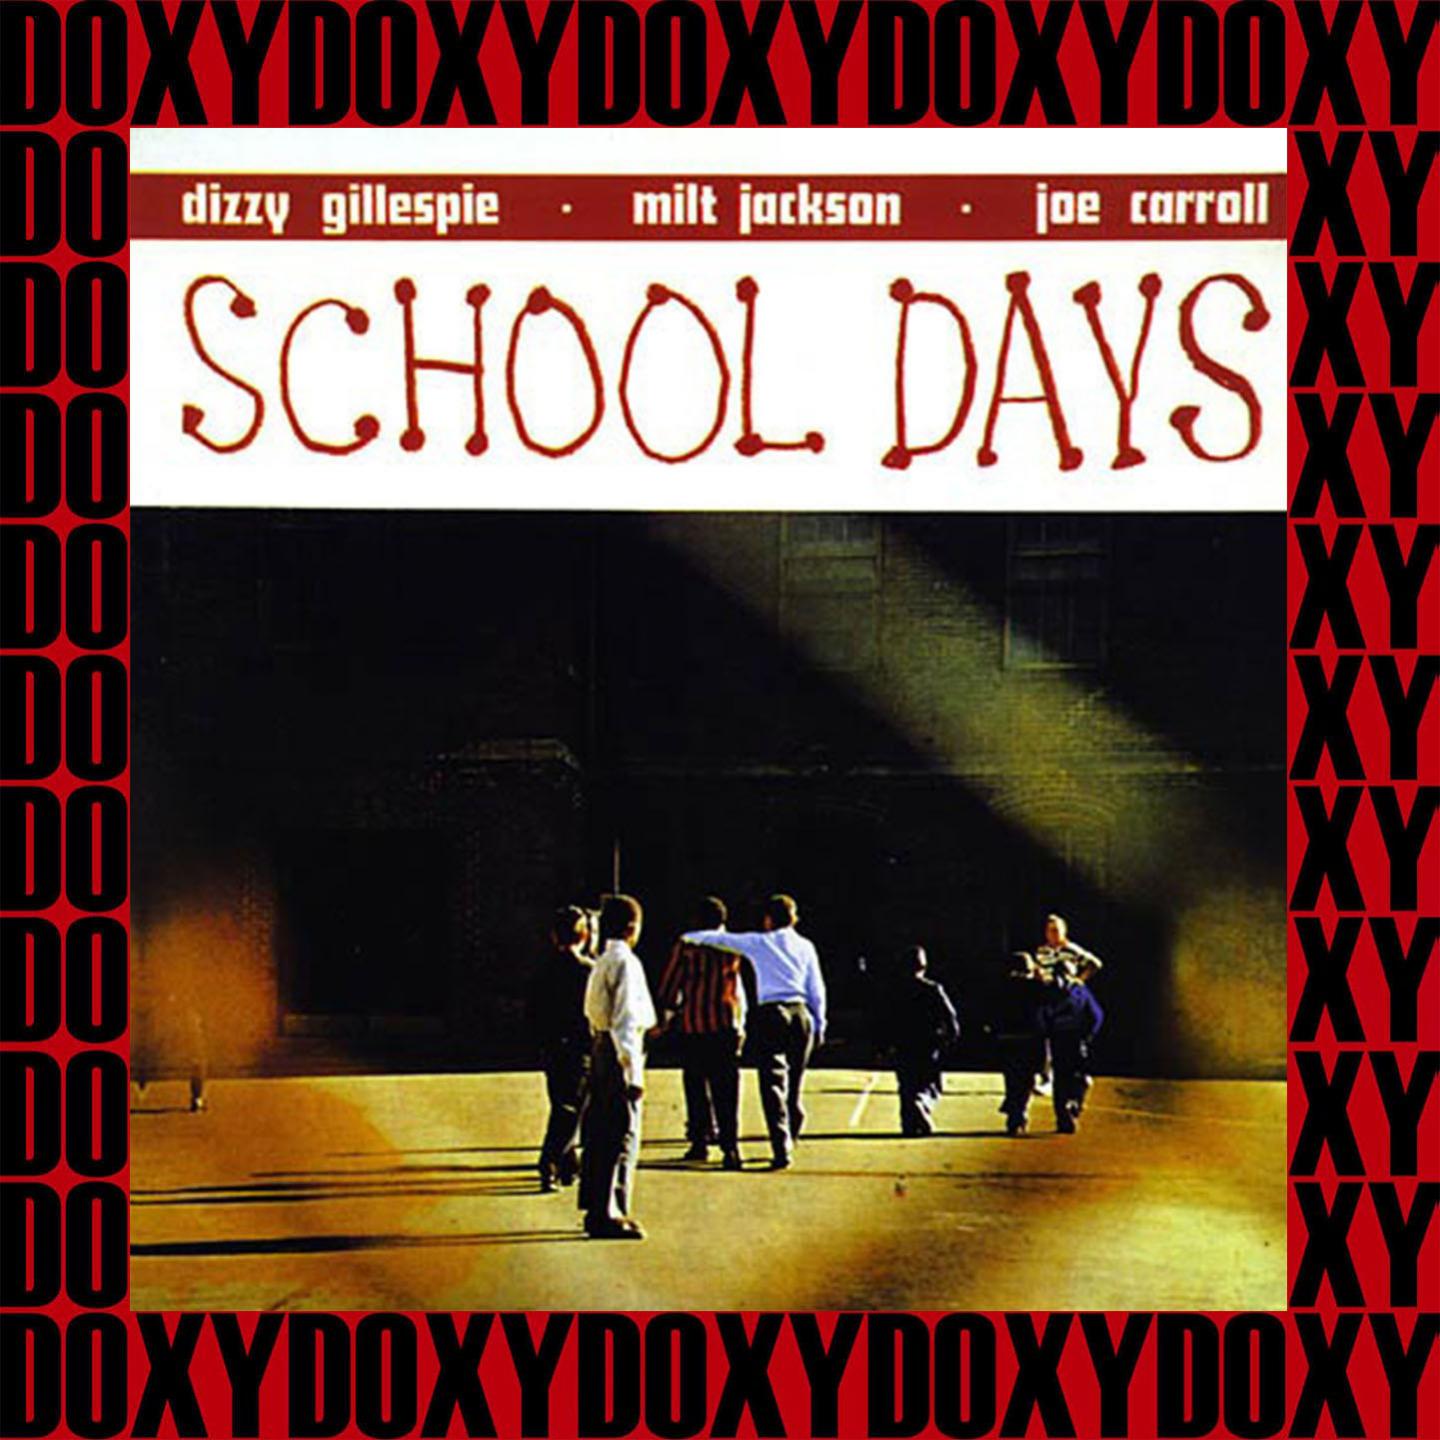 School Days (Remastered Version) (Doxy Collection)